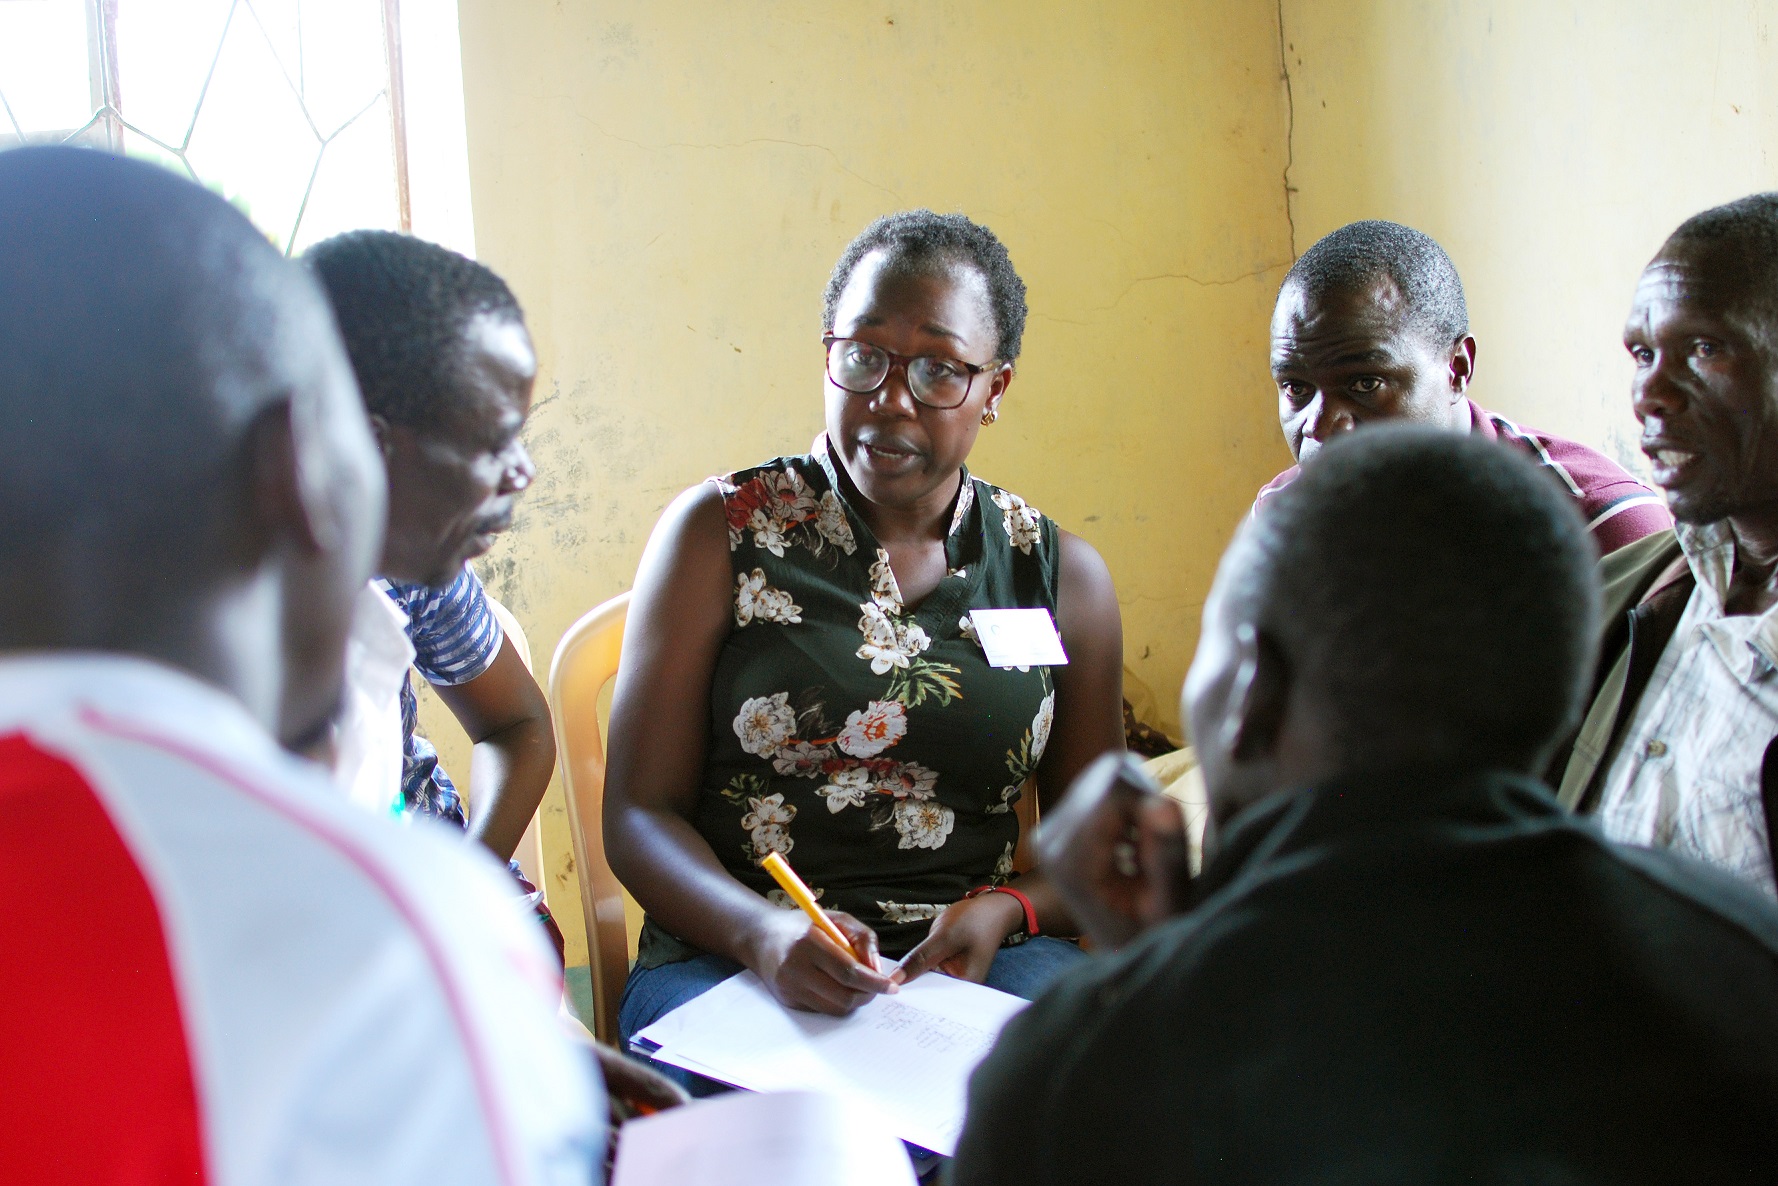 Abigail, an IDinsight surveyor, conducts a participatory wealth ranking exercise with community leaders in Nyatika, Migori, Kenya to identify community members for the survey